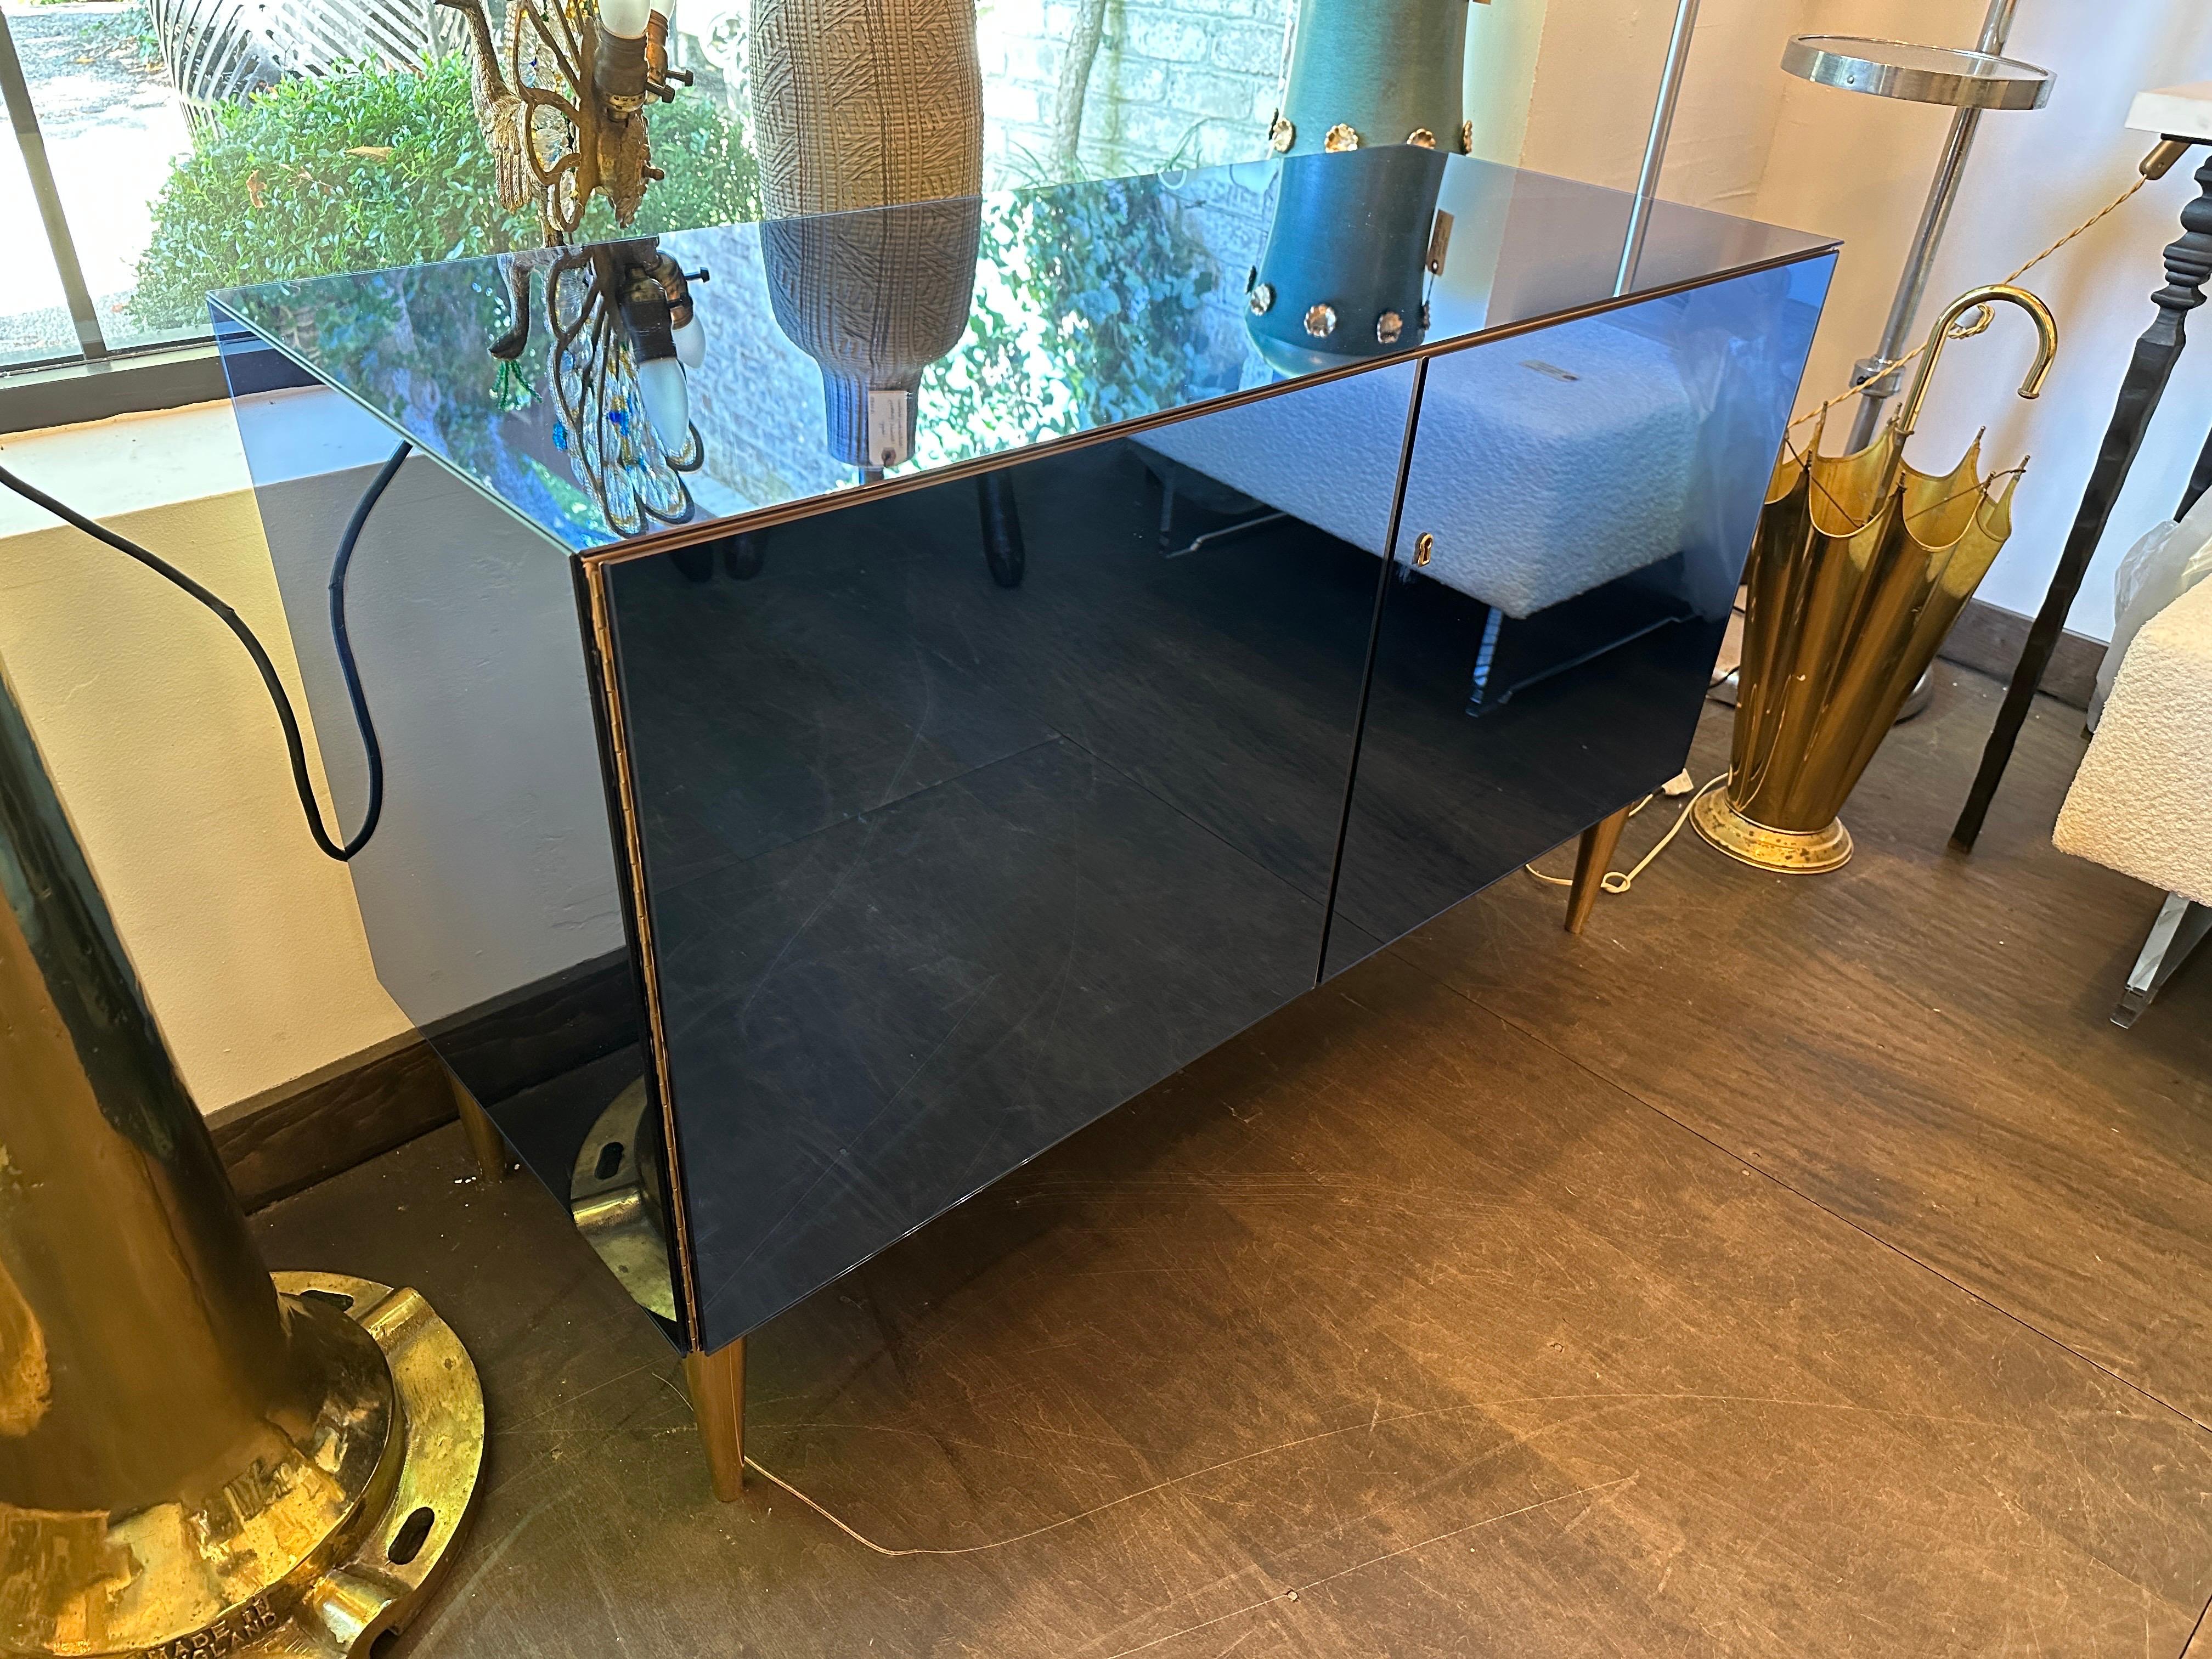 This custom made cabinet by Effetto Vetro in Milan is of very high quality Italian craftsmanship.  Beautiful details such interior casing in light woods, single shelf, solid bronze conical legs and a mirror clad matching key.  NOTE:  we have TWO